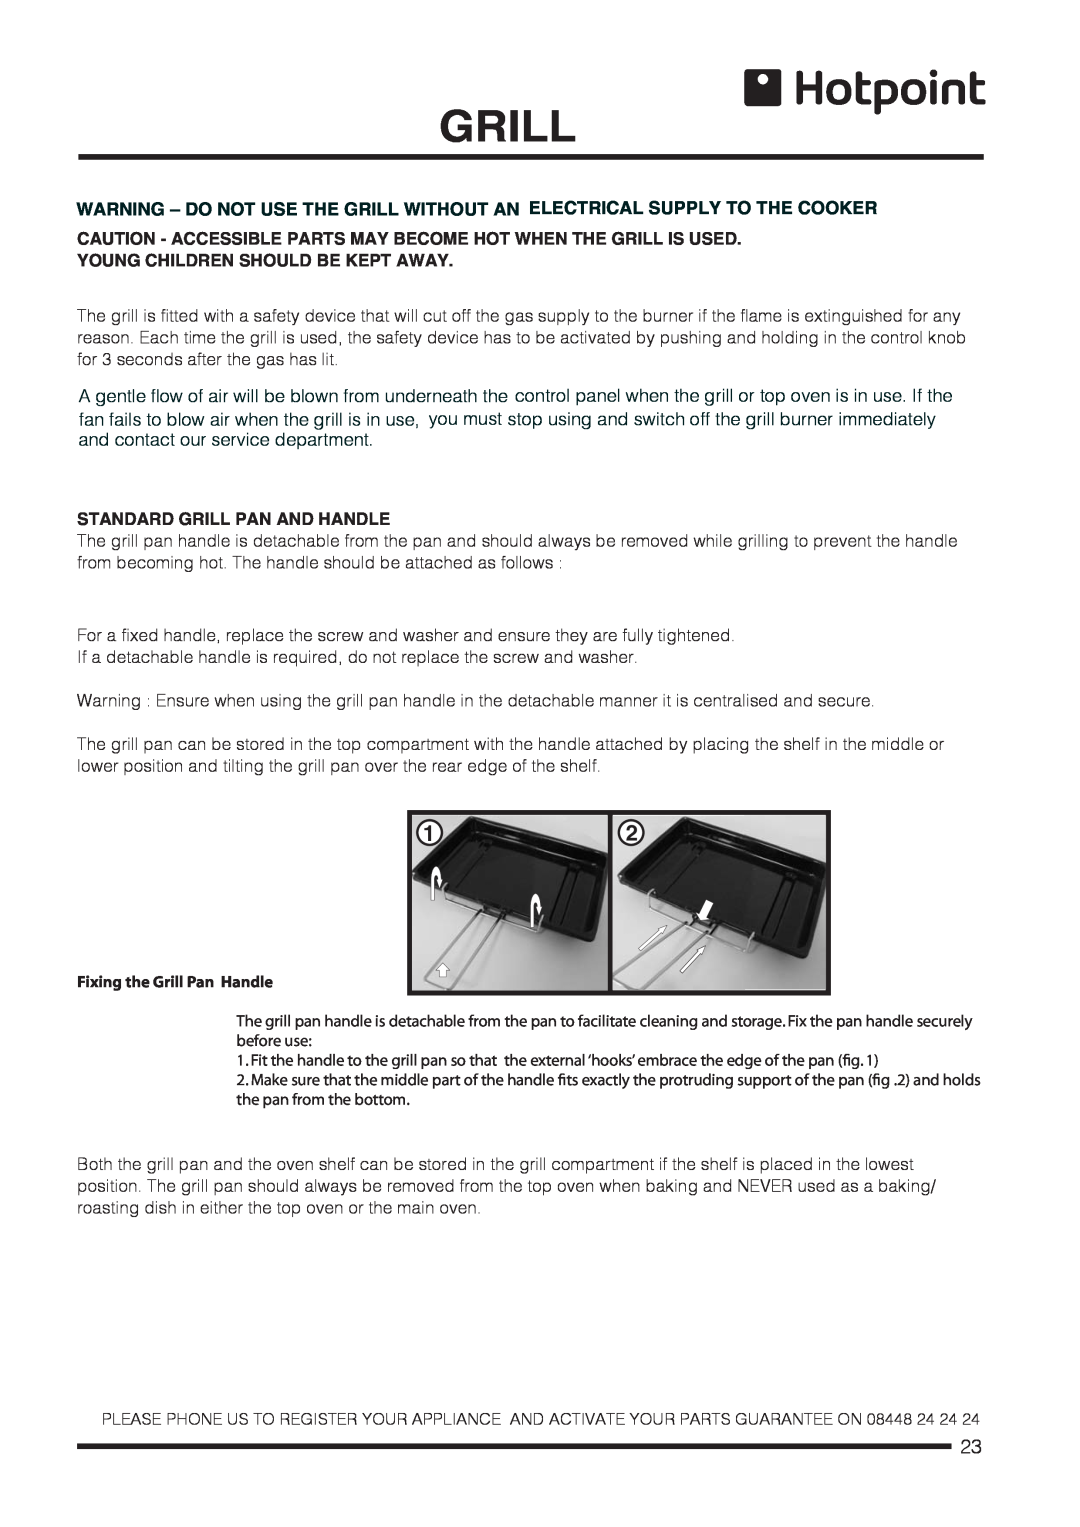 Hotpoint CH60GCIW Caution - Accessible Parts May Become Hot When The Grill Is Used, Young Children Should Be Kept Away 